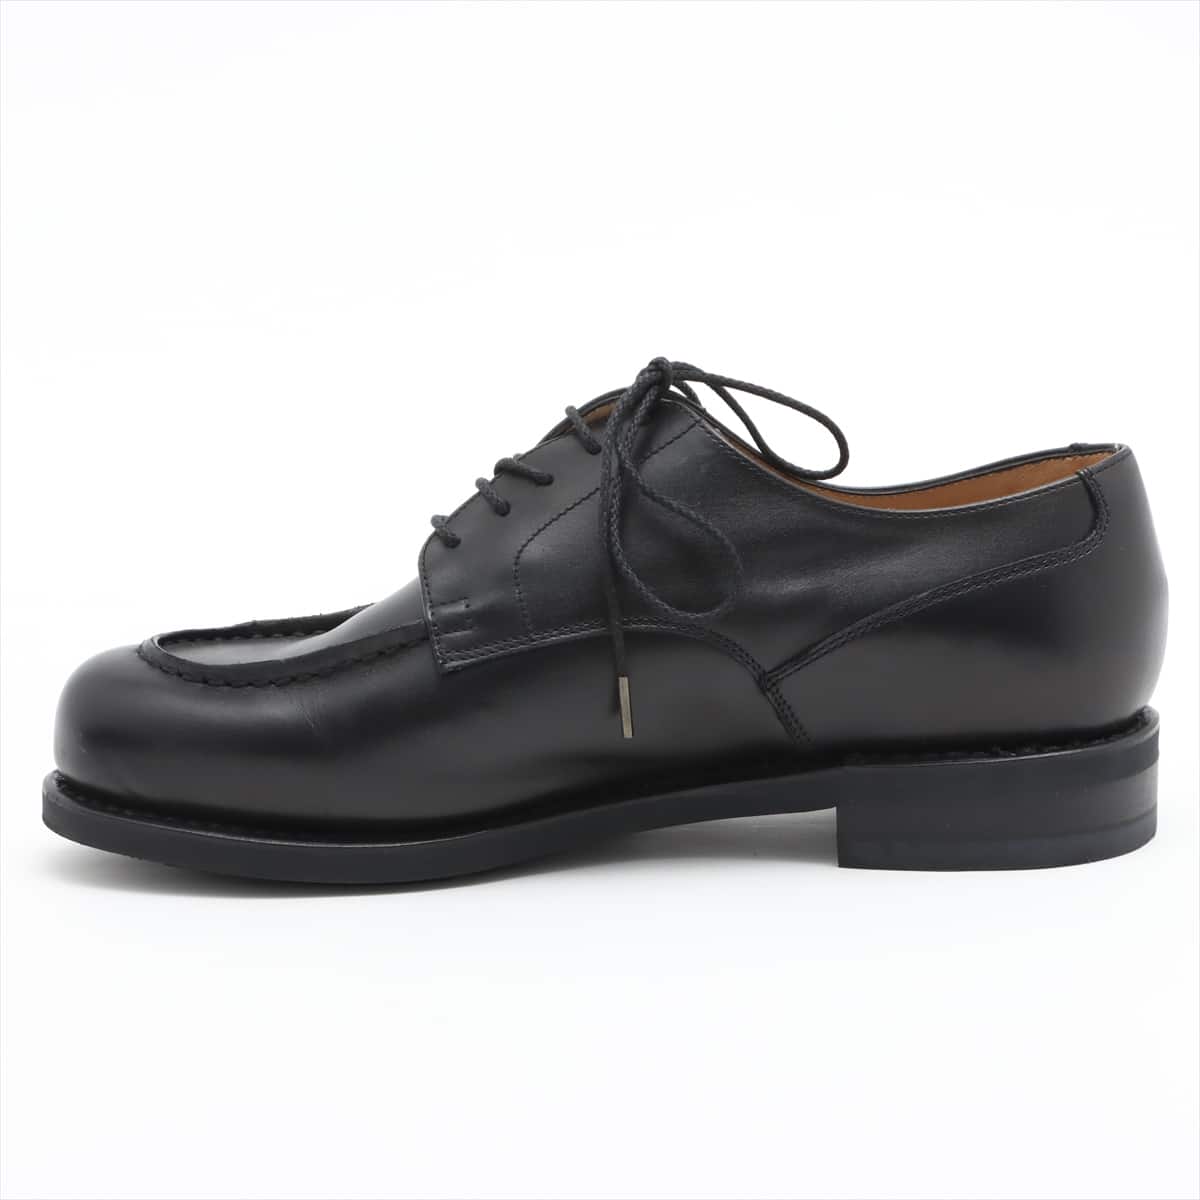 Paraboot Chambord Leather Leather shoes 6 1/2F Men's Black